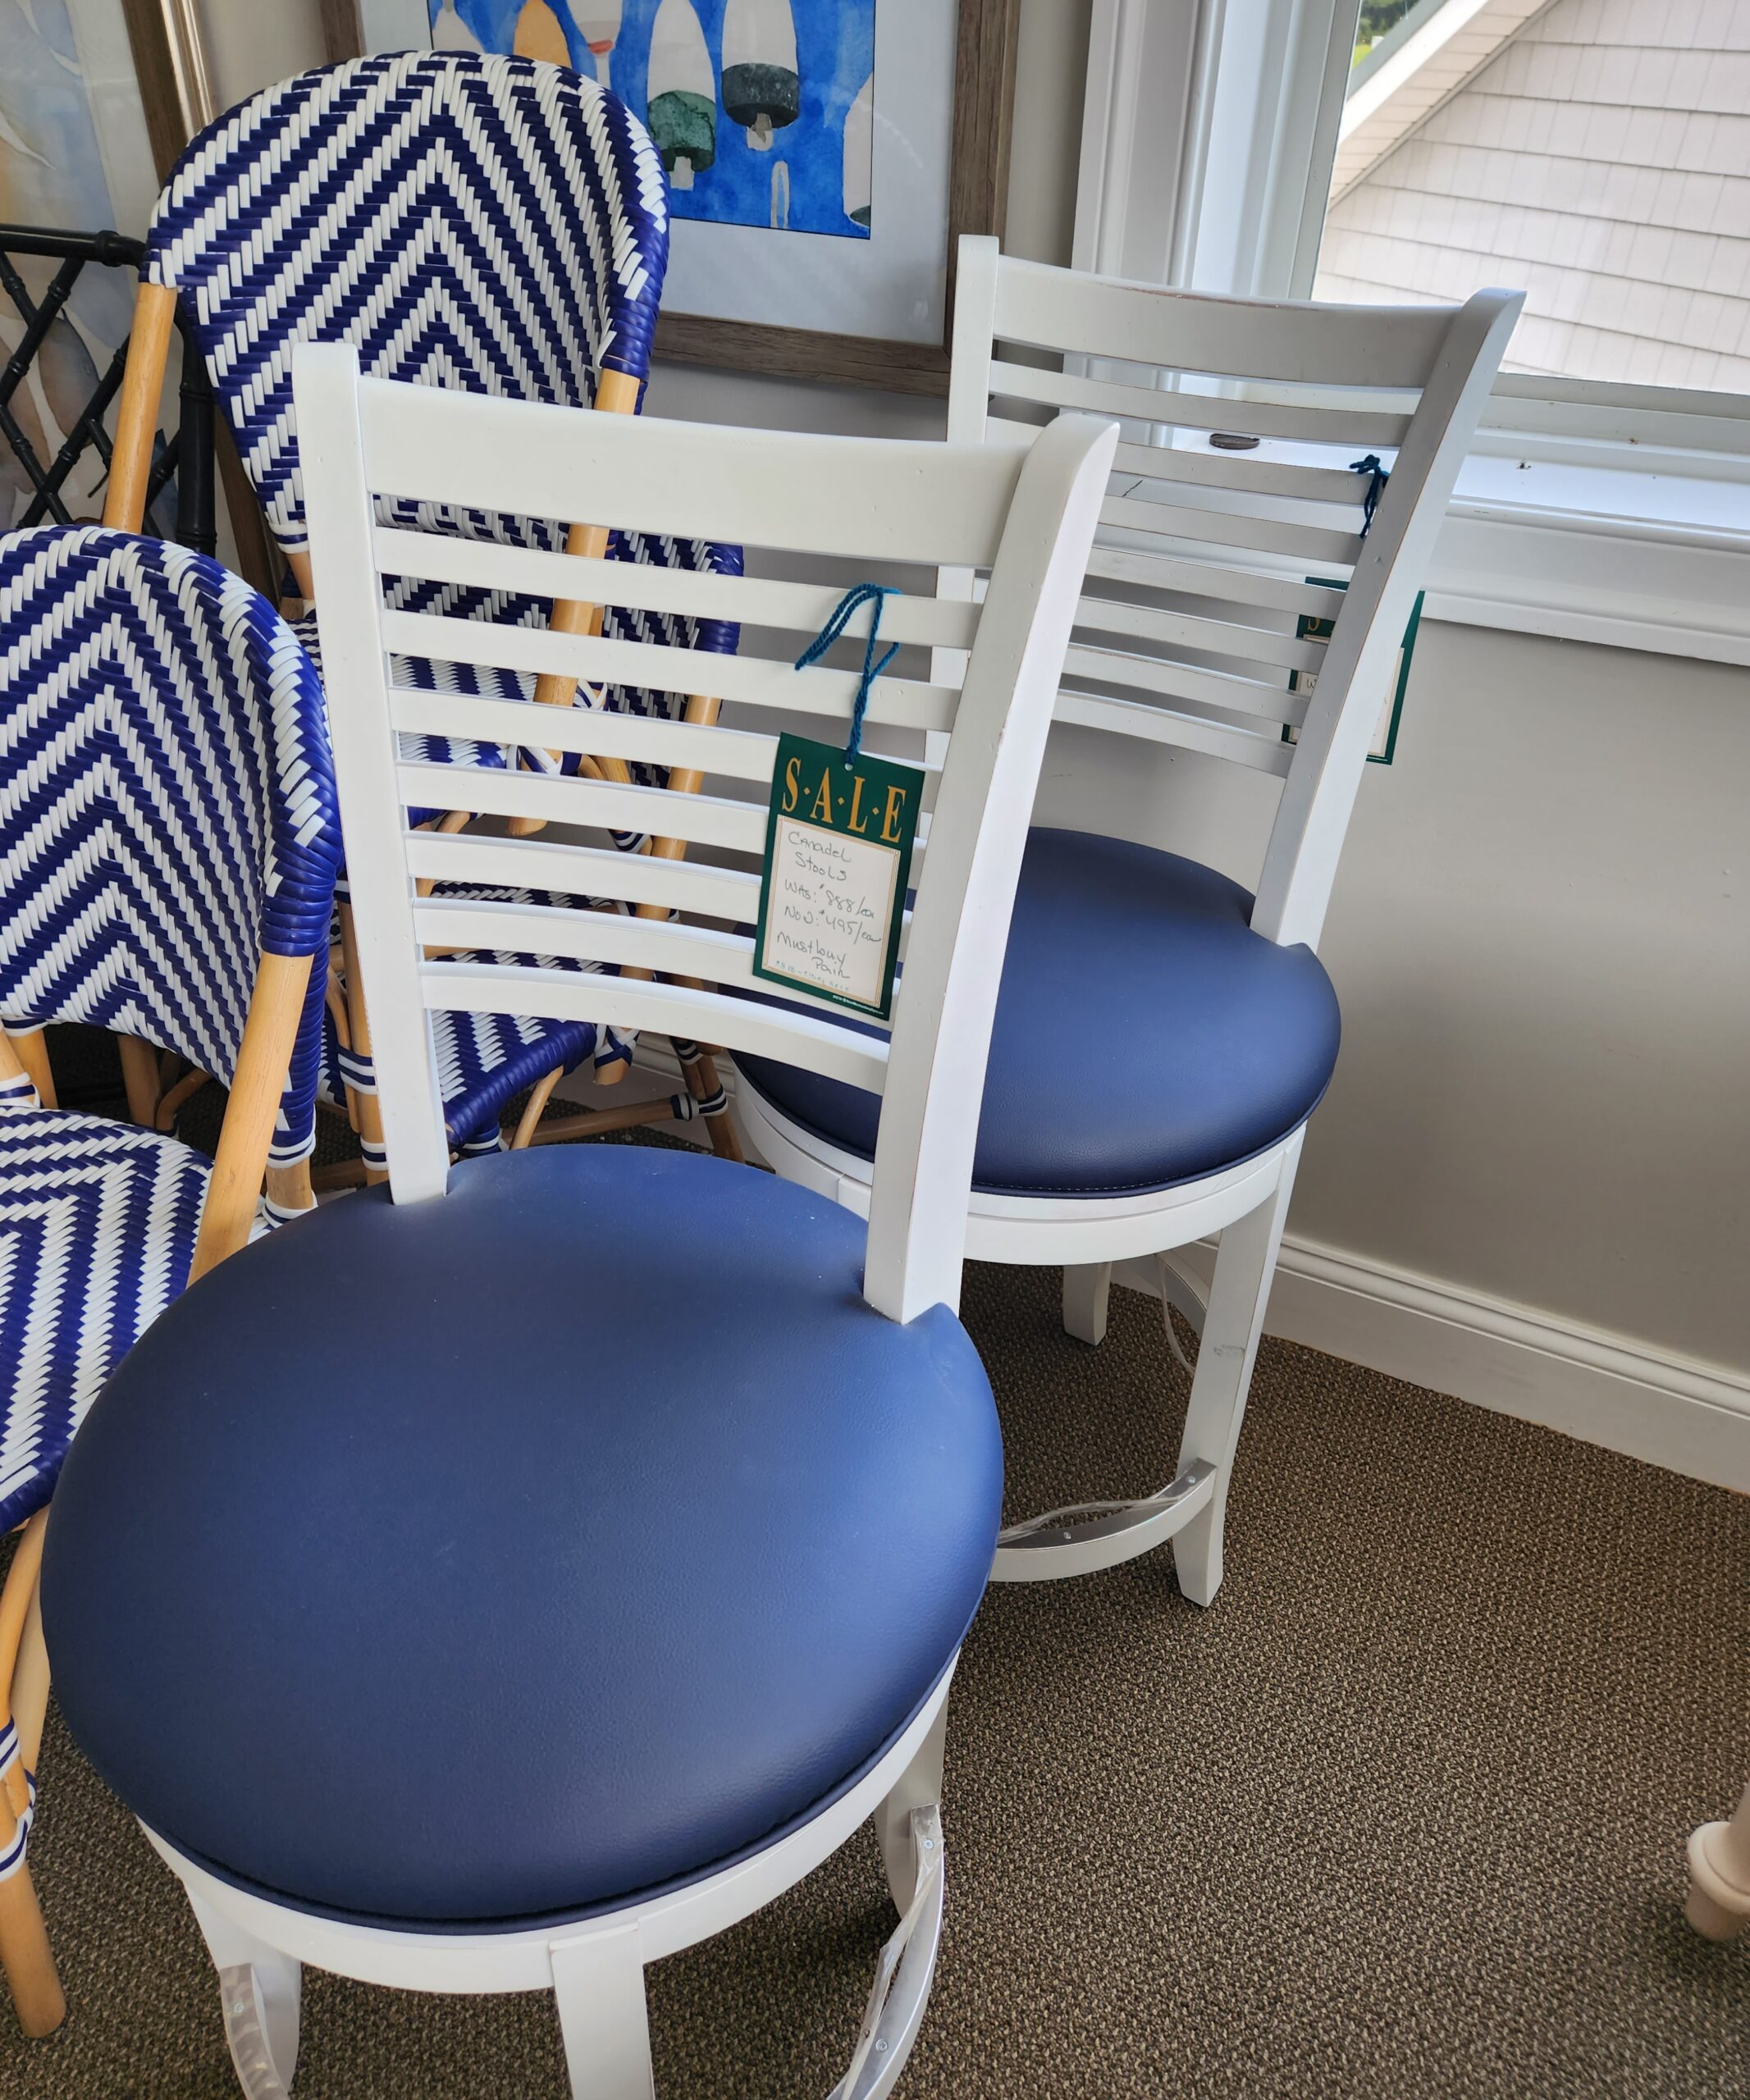 two white rocking chairs with blue cushions on them